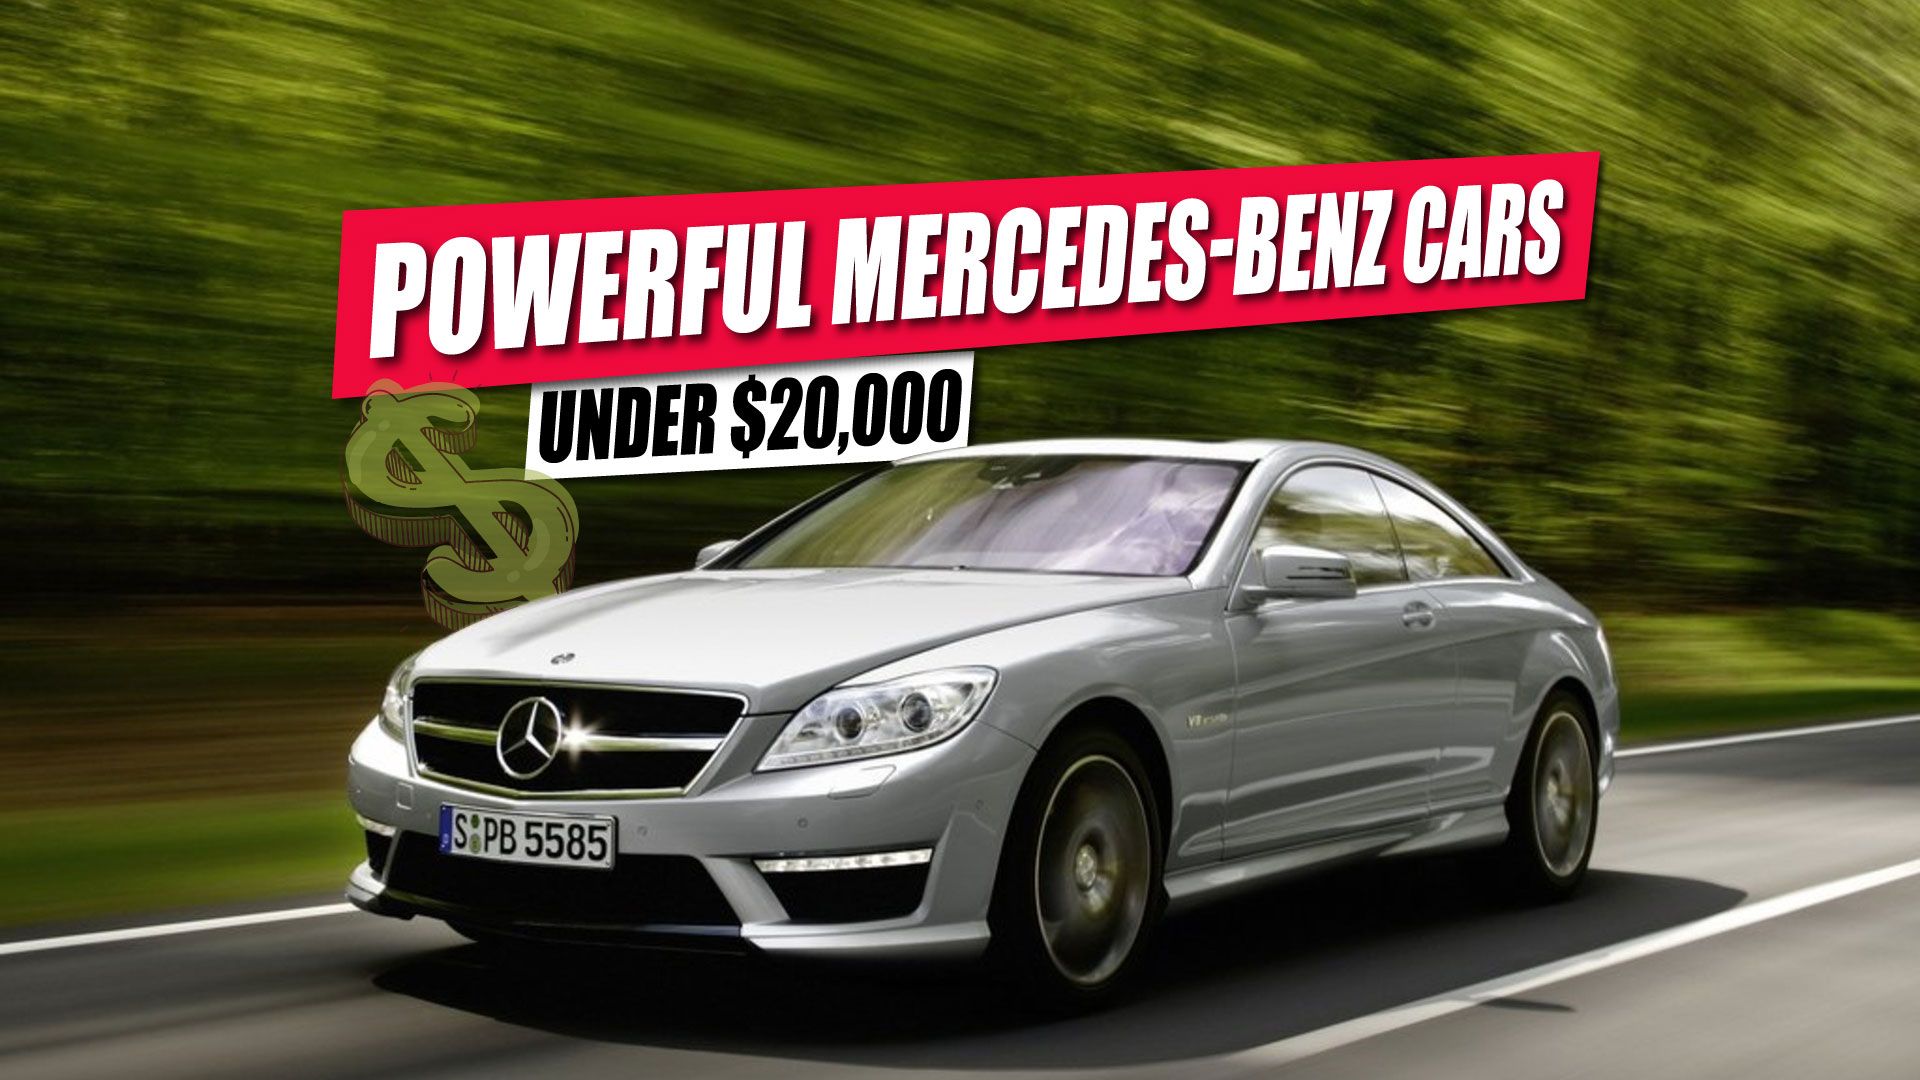 Powerful Mercedes-Benz Cars featured image